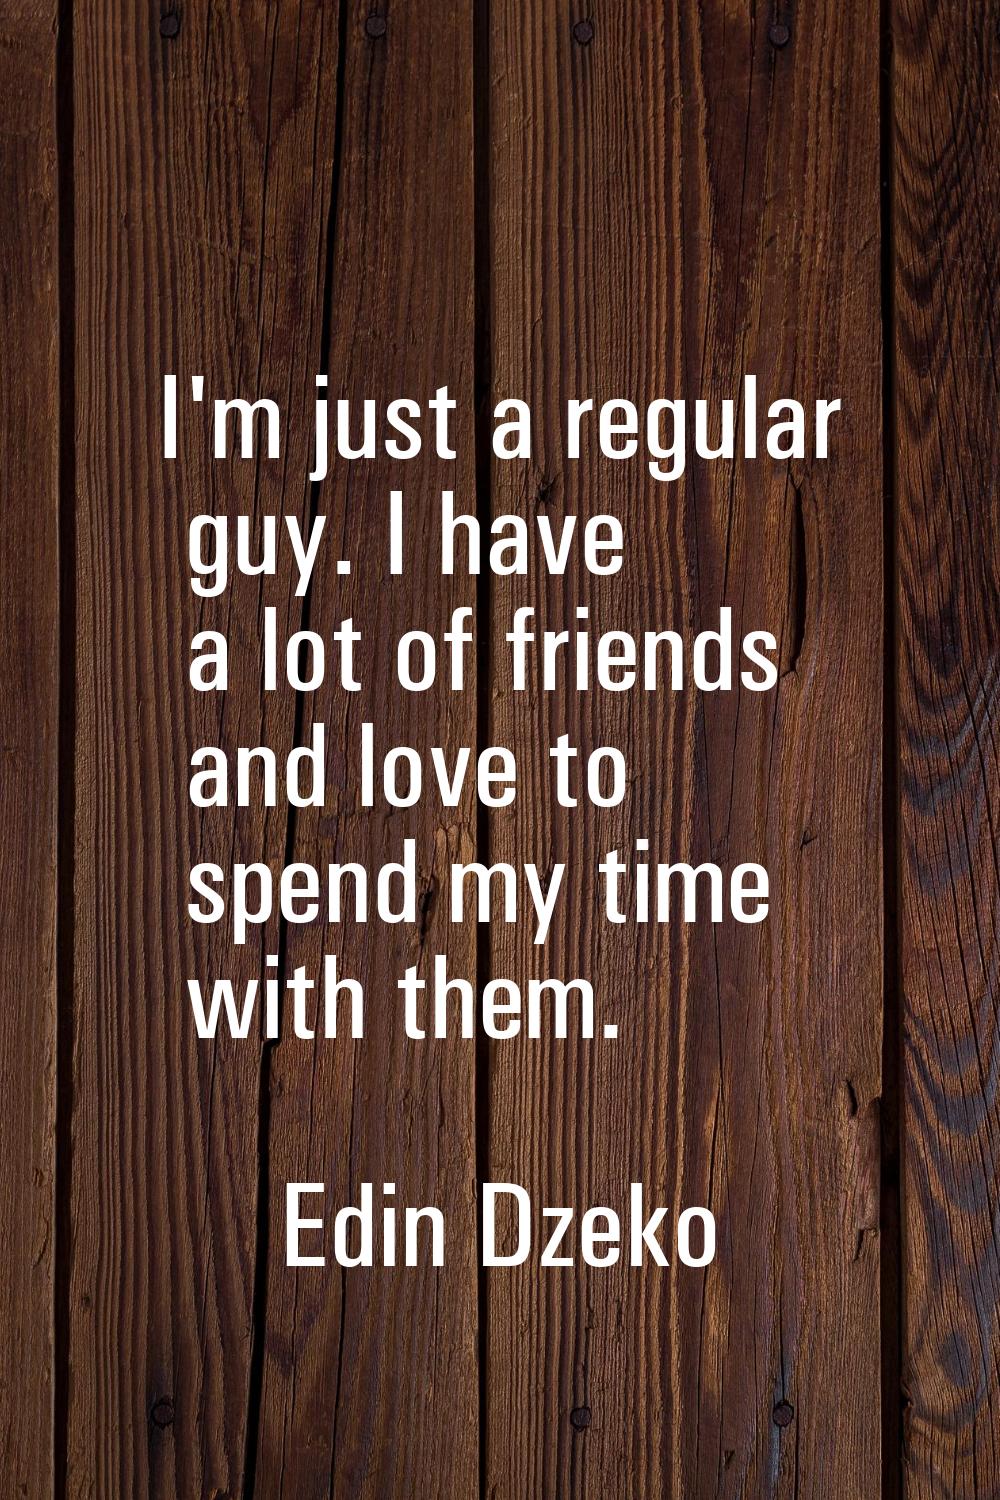 I'm just a regular guy. I have a lot of friends and love to spend my time with them.